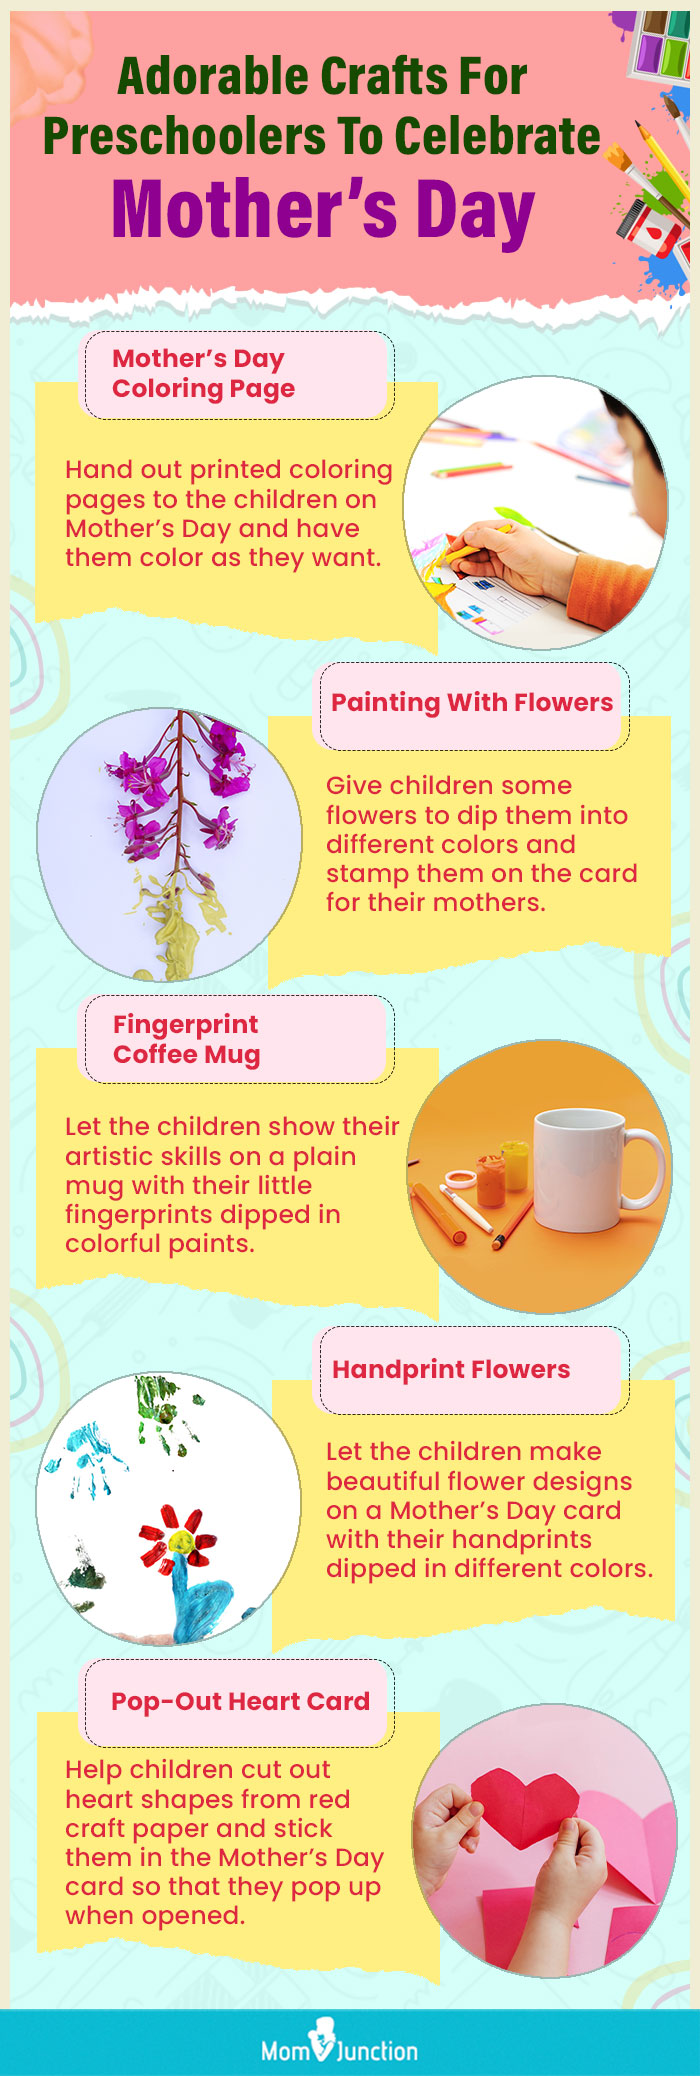 adorable crafts for preschoolers to celebrate mothers day (infographic)